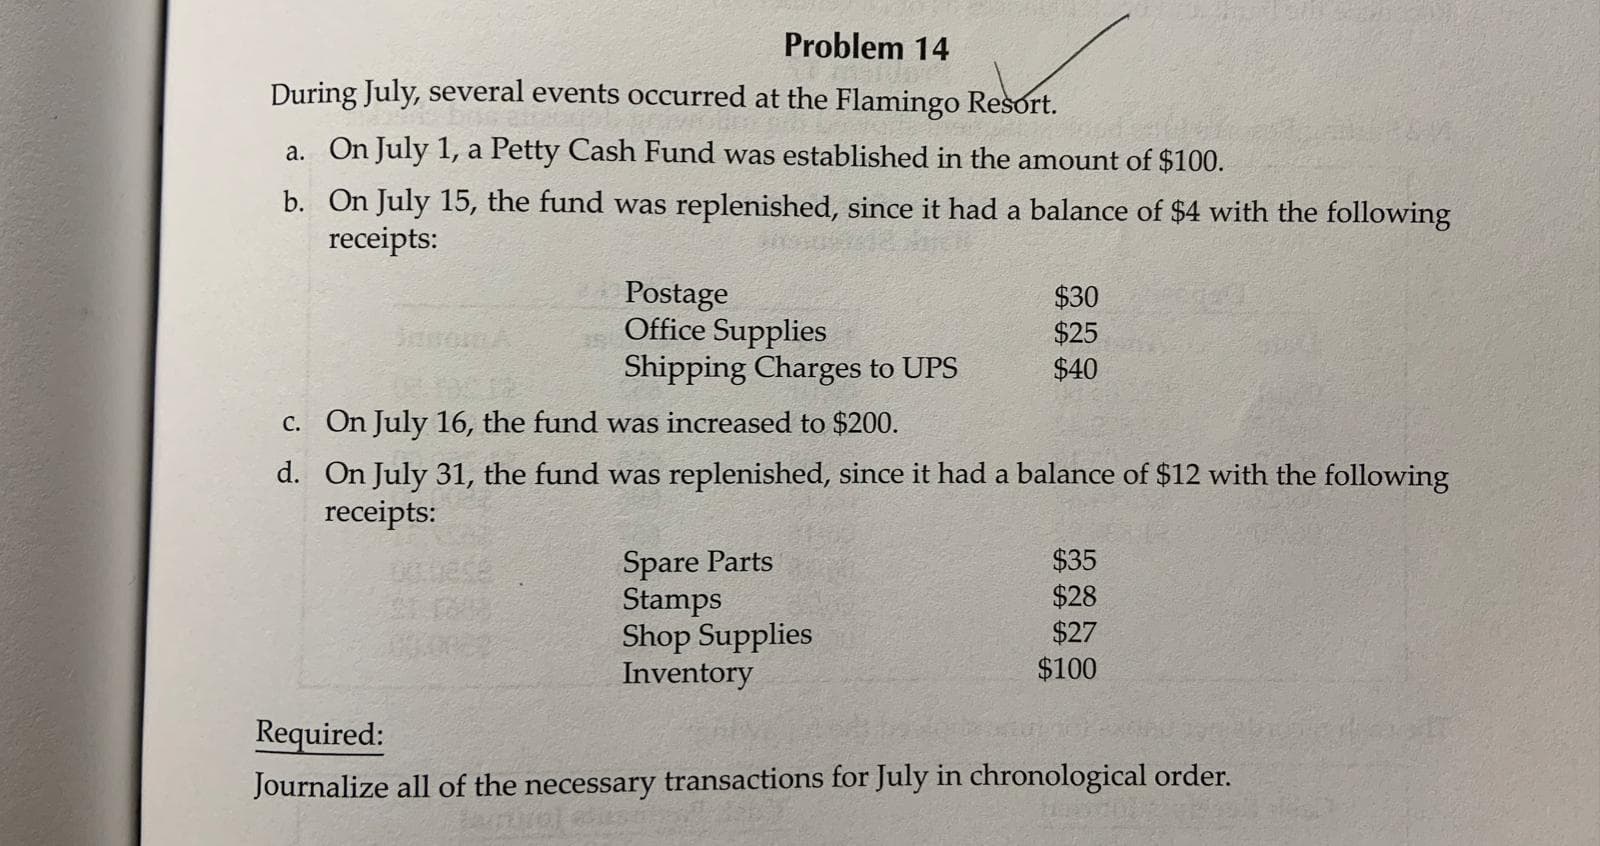 Problem 14
During July, several events occurred at the Flamingo Resort.
a. On July 1, a Petty Cash Fund was established in the amount of $100.
b. On July 15, the fund was replenished, since it had a balance of $4 with the following
receipts:
Postage
Office Supplies
Shipping Charges to UPS
$30
$25
$40
On July 16, the fund was increased to $200.
c.
d.
On July 31, the fund was replenished, since it had a balance of $12 with the following
receipts:
Spare Parts
Stamps
Shop Supplies
Inventory
$35
$28
$27
$100
03:08
Required:
Journalize all of the necessary transactions for July in chronological order.
